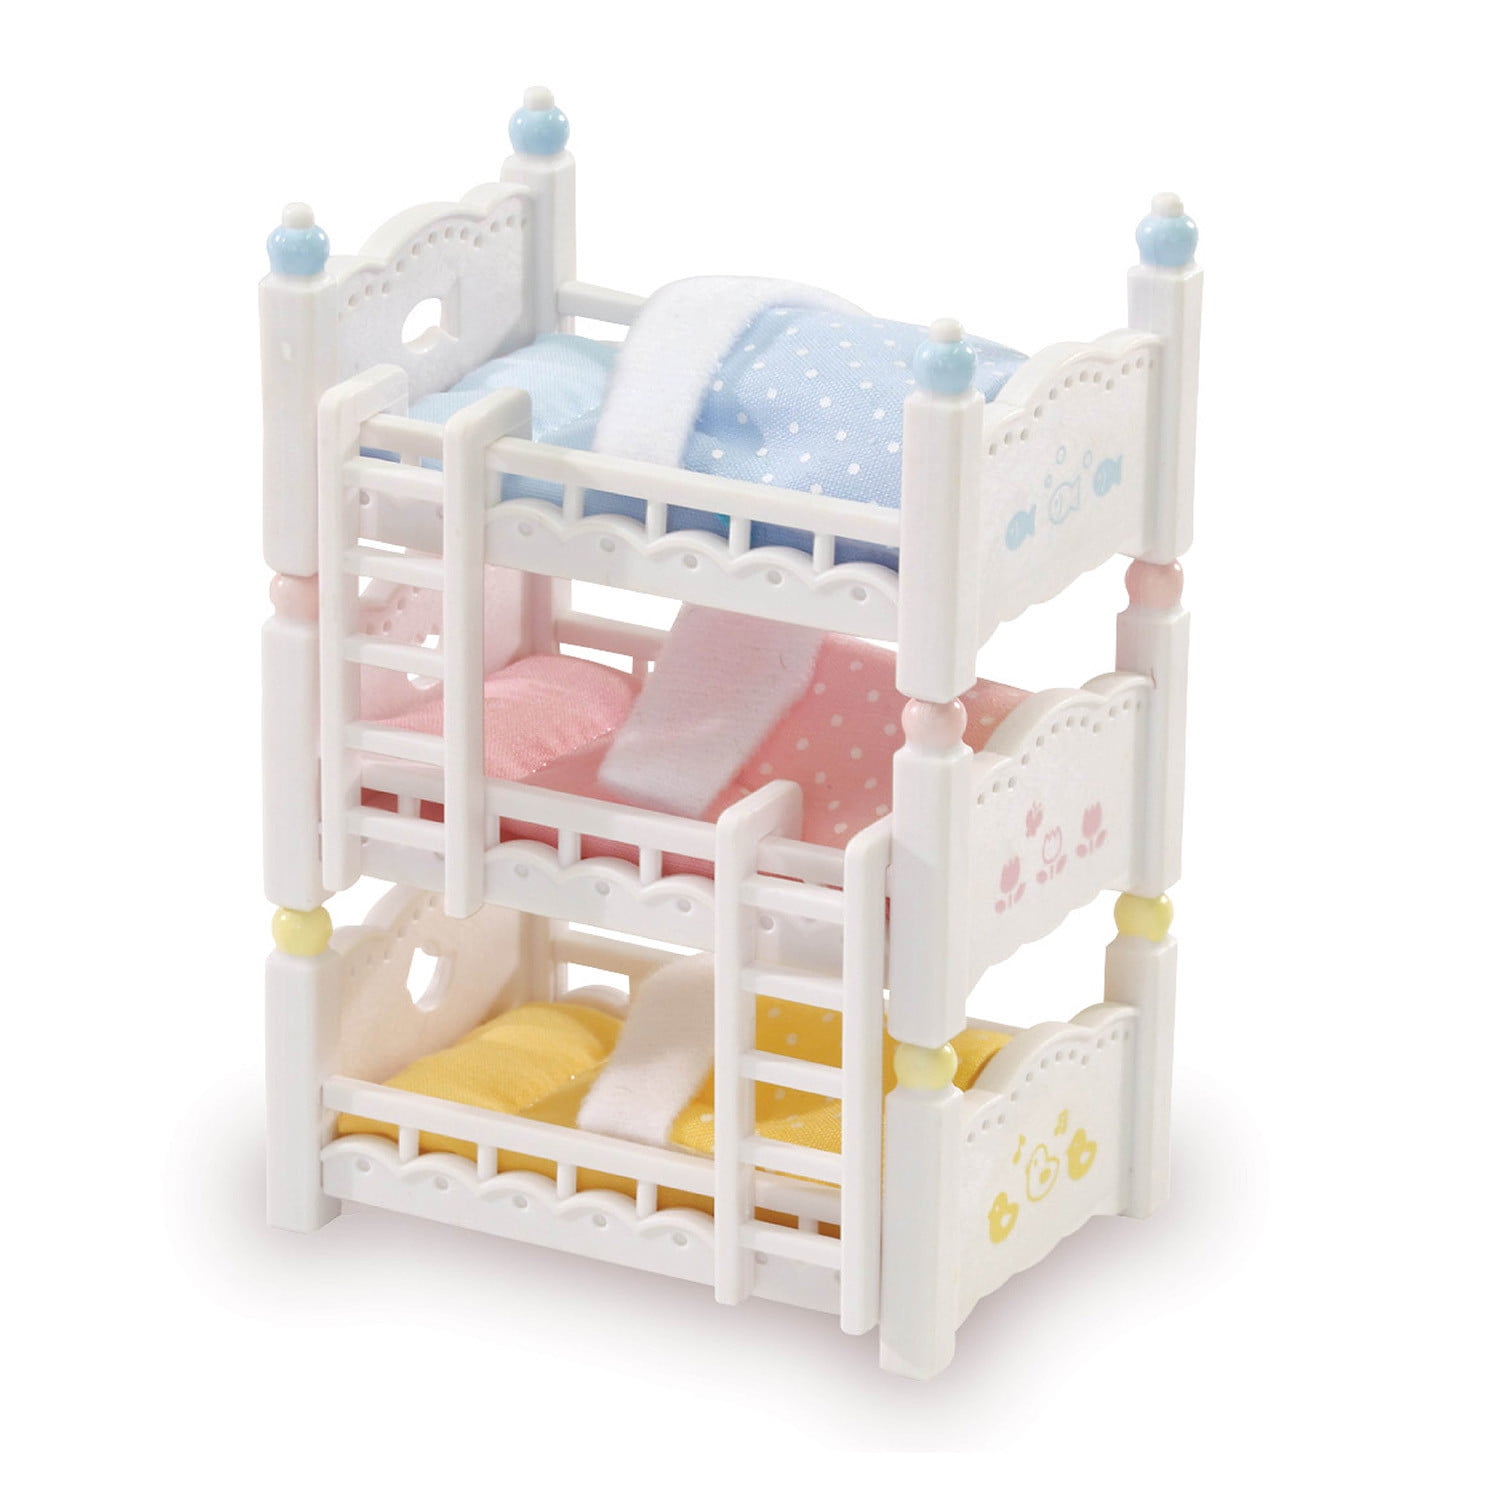 Sylvanian Families Bunk Beds & Bedding Calico Critters Epoch Furniture Spares 